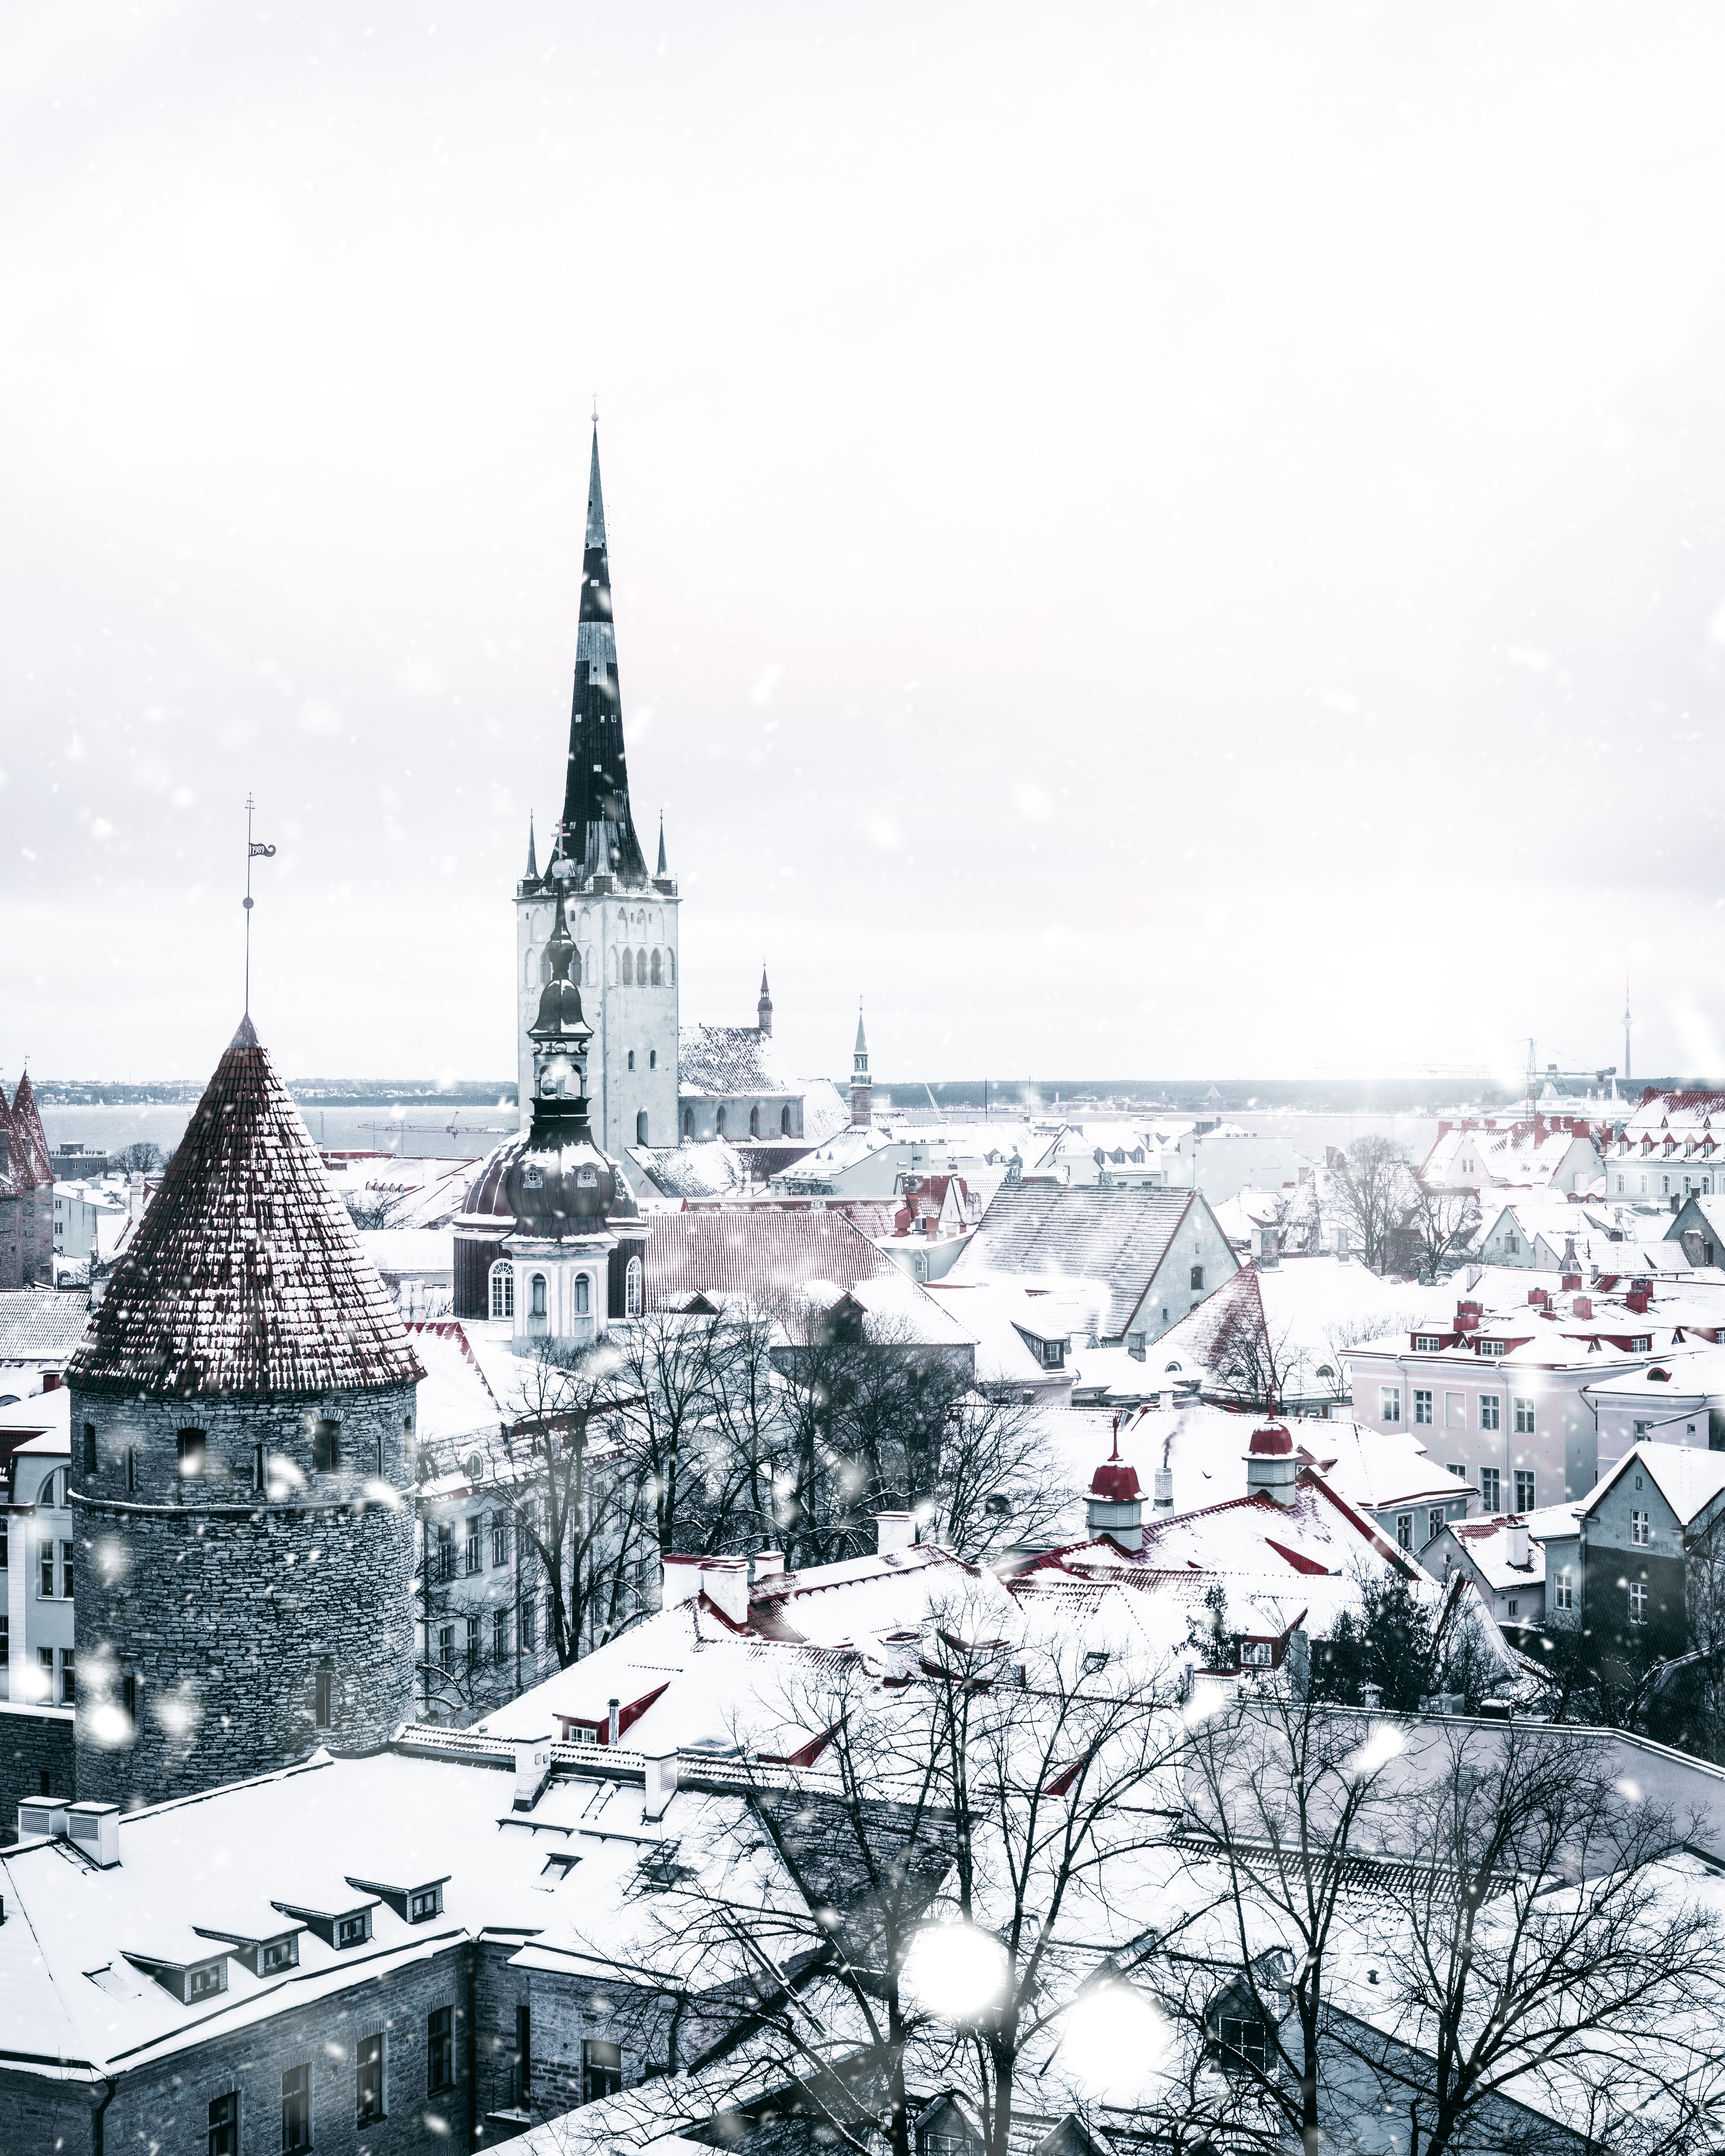 125260 download wallpaper cities, winter, architecture, white, city, snowfall screensavers and pictures for free